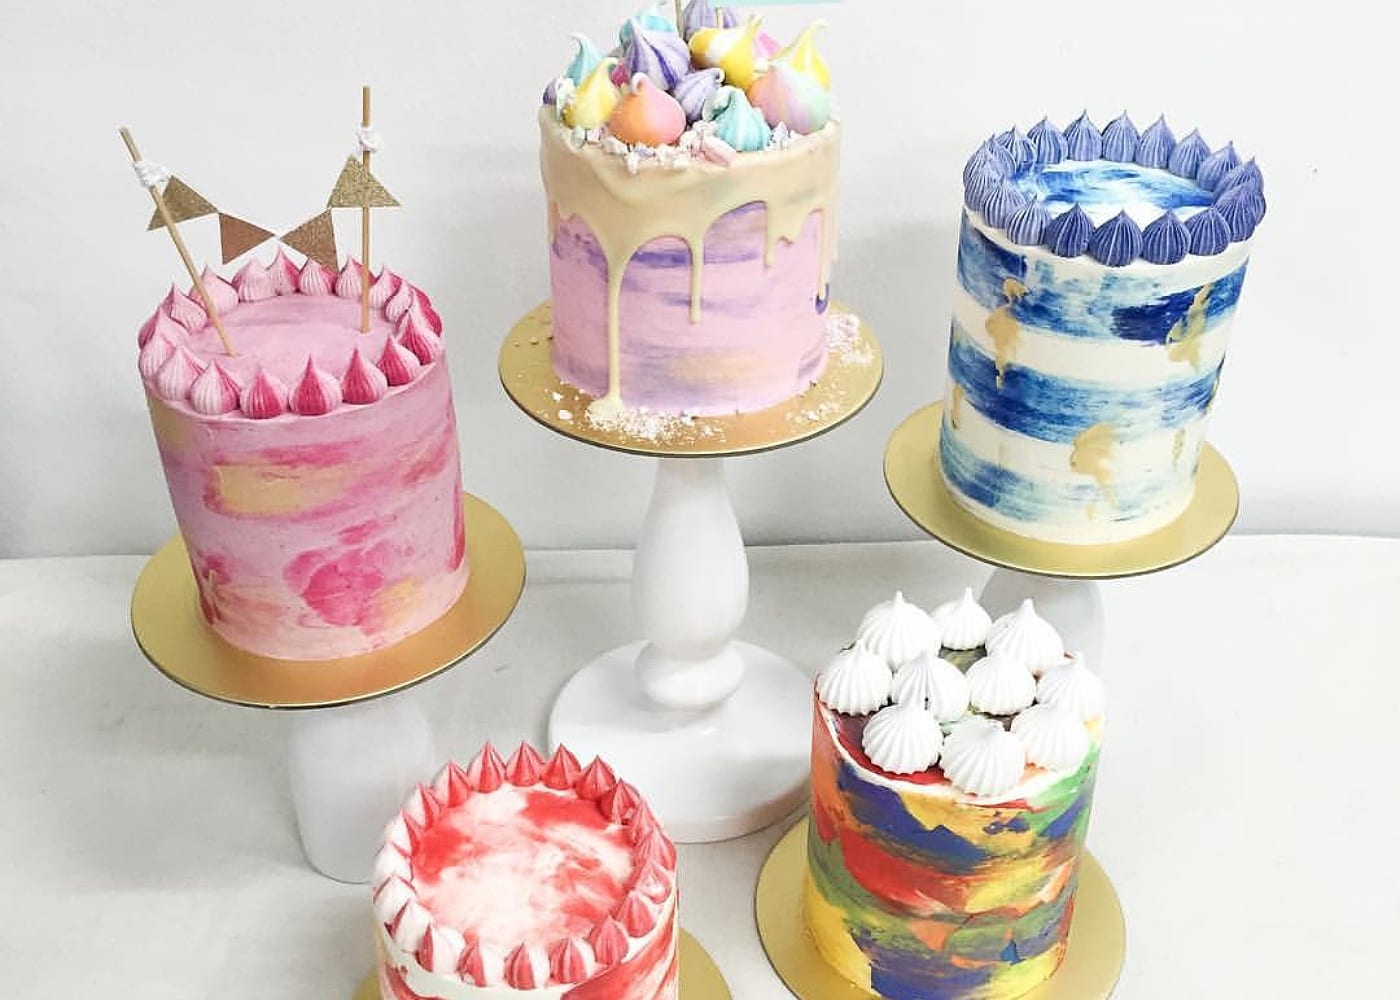 Creative Custom Cakes for Everyday Occasions